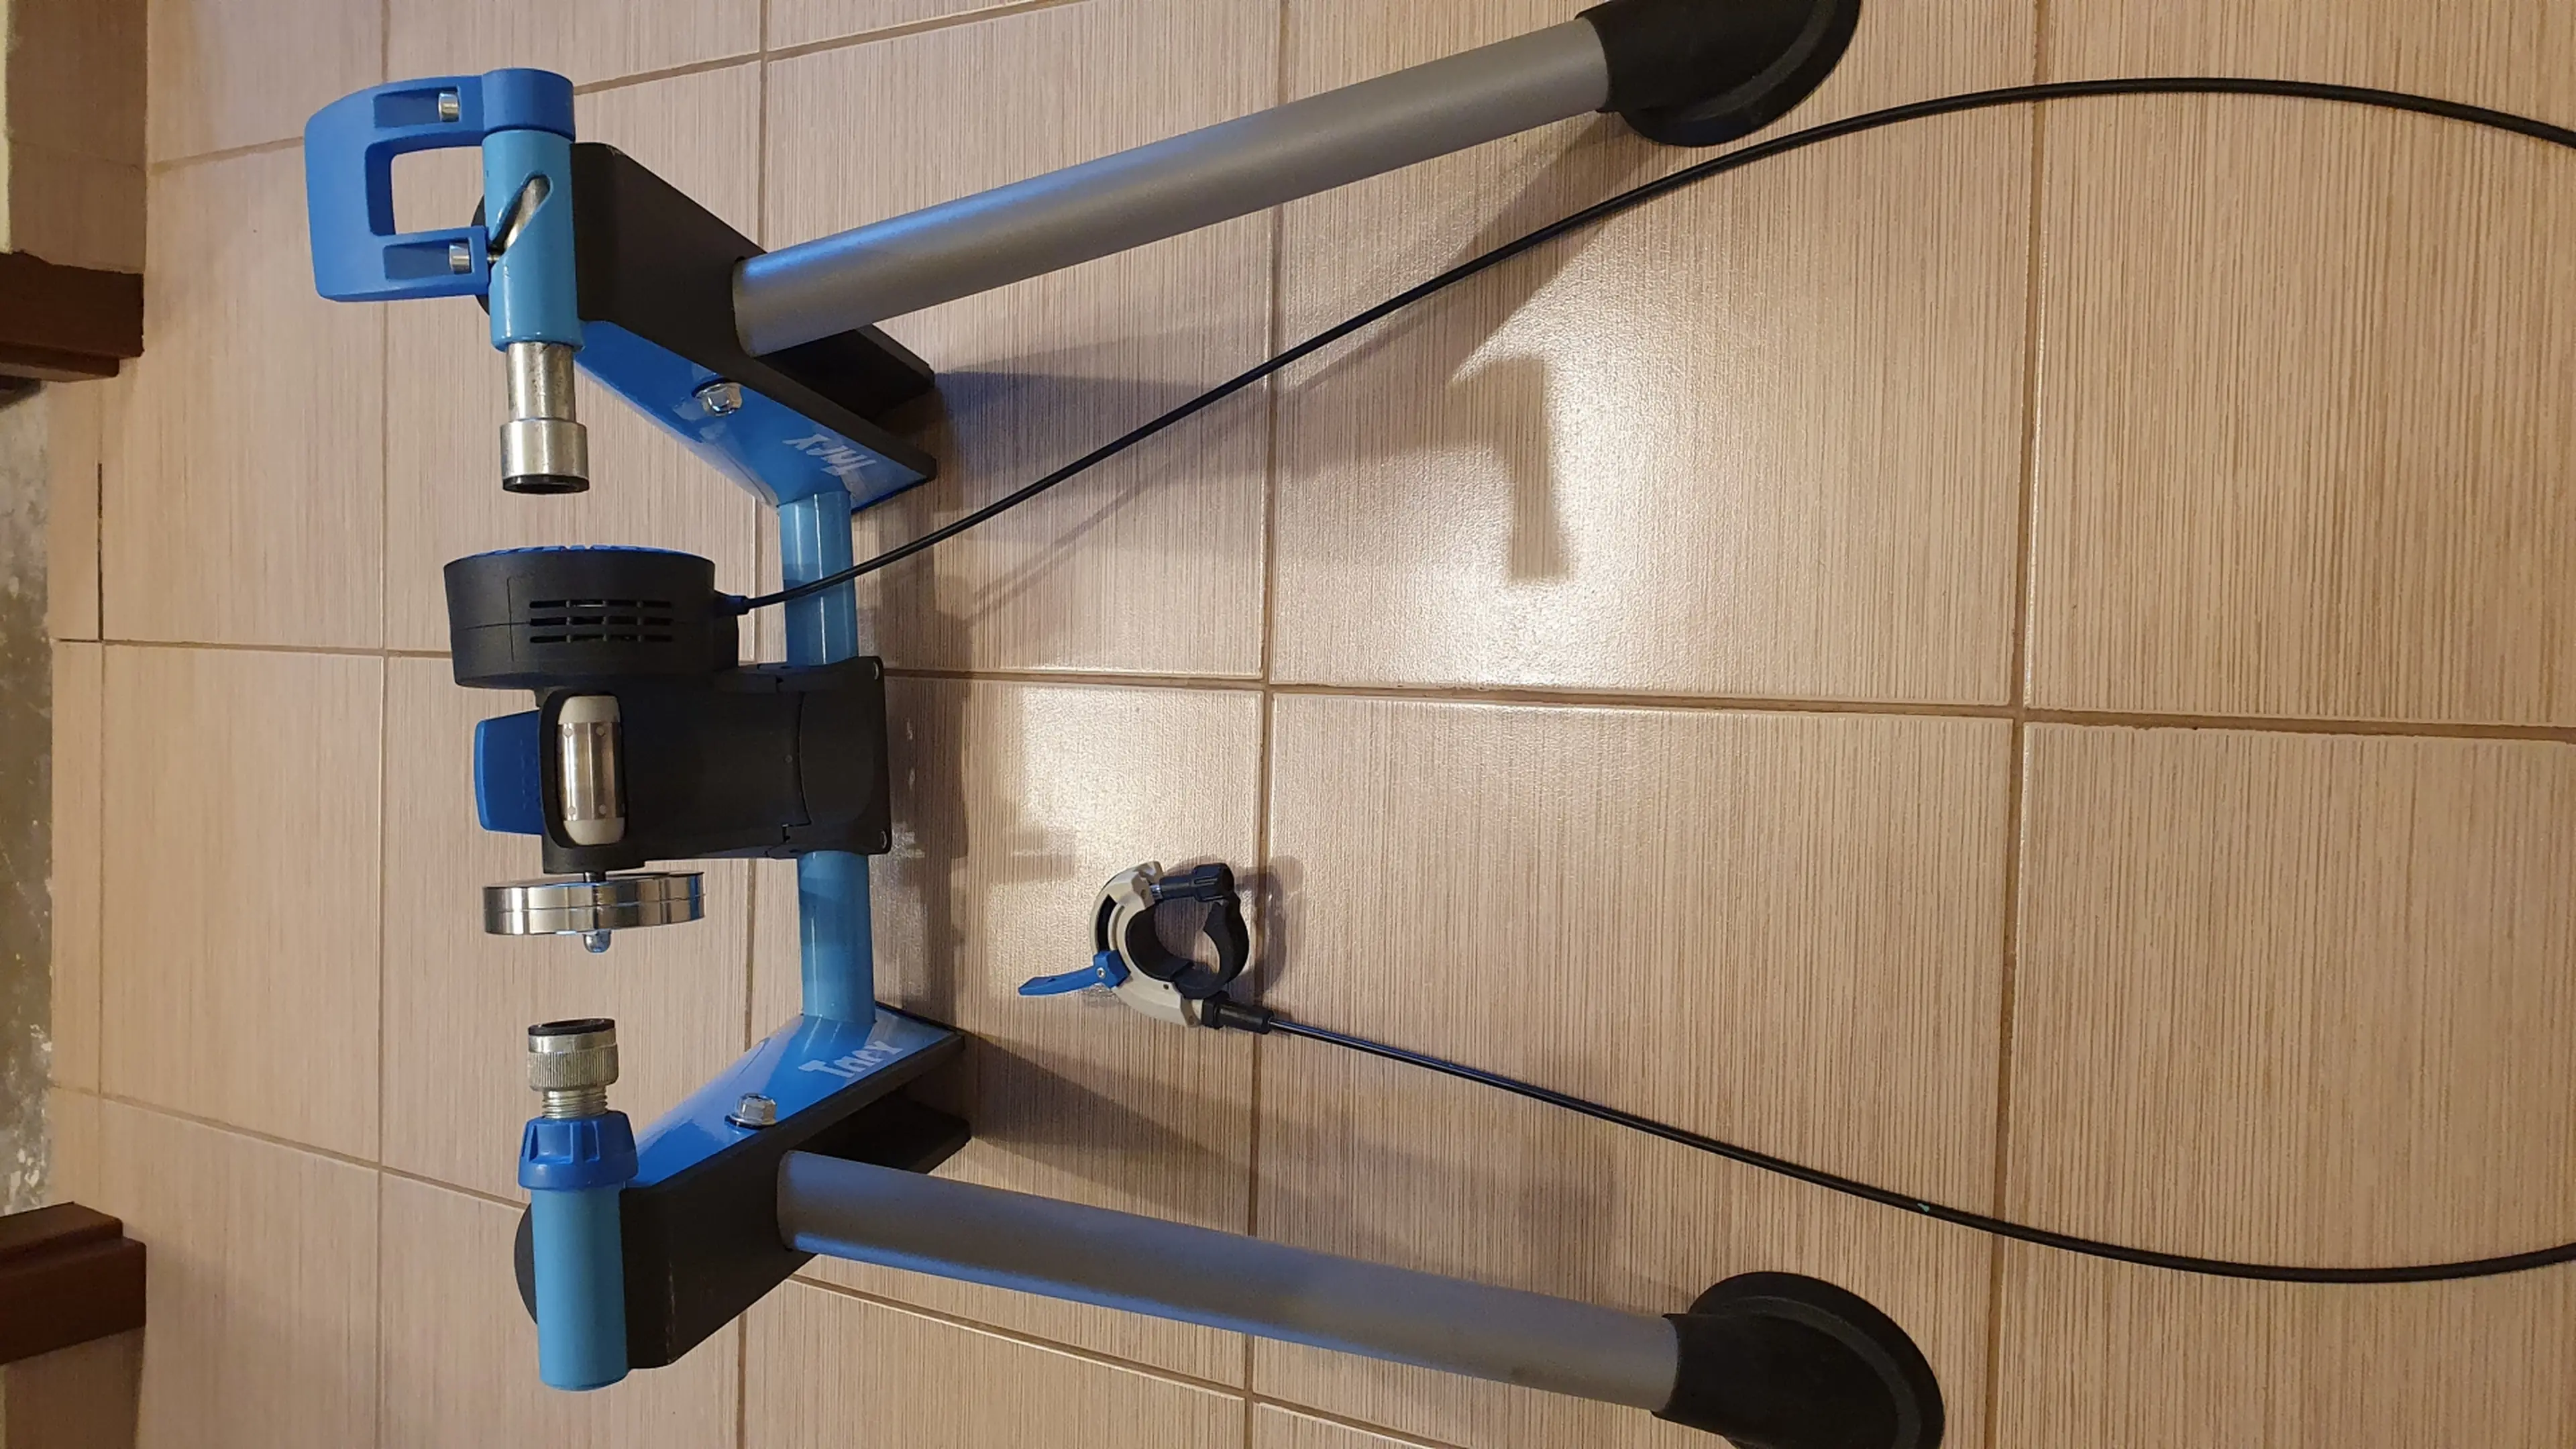 2. Vand trainer Tacx Blue Matic T2650